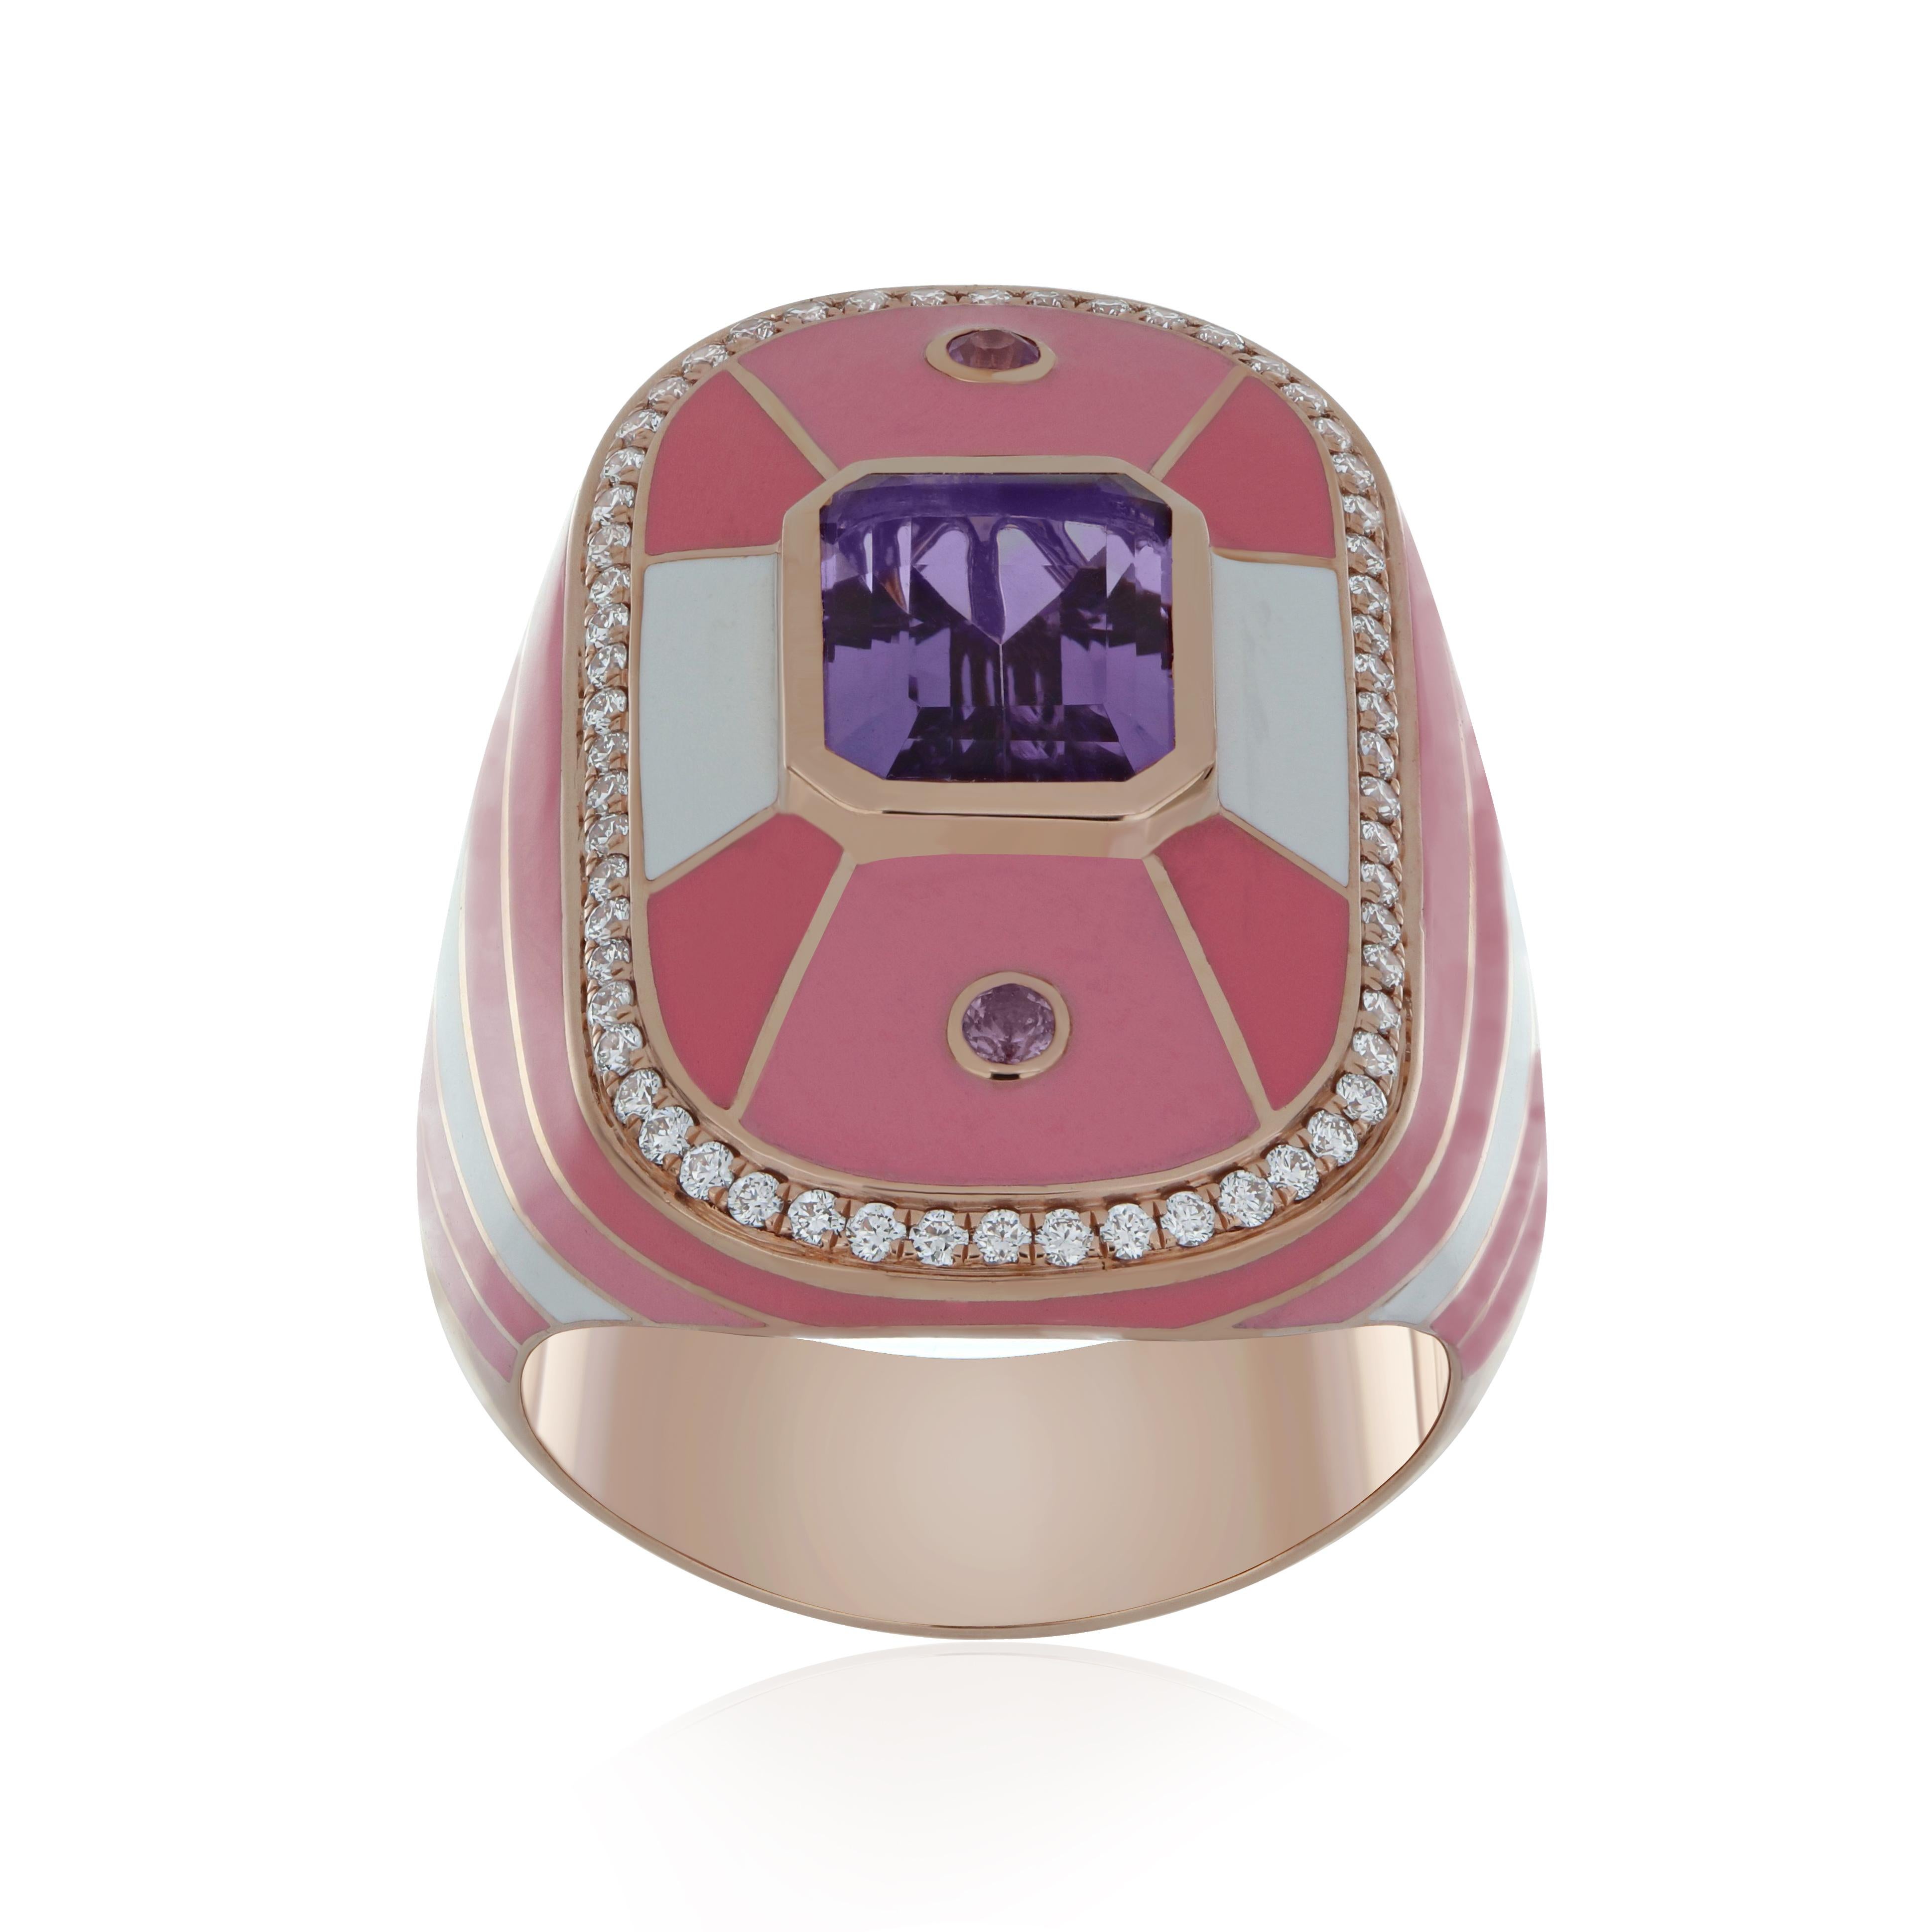 Elegant and Exquisitely detailed 14 karat Roes Gold Ring, with 2.10
Cts (approx.) Octagon Shape Pink Amethyst set in center and Surrounded by Enamel, and Micro pave Diamonds, weighing approx. 0.35 CT's. (approx.) total carat weight with